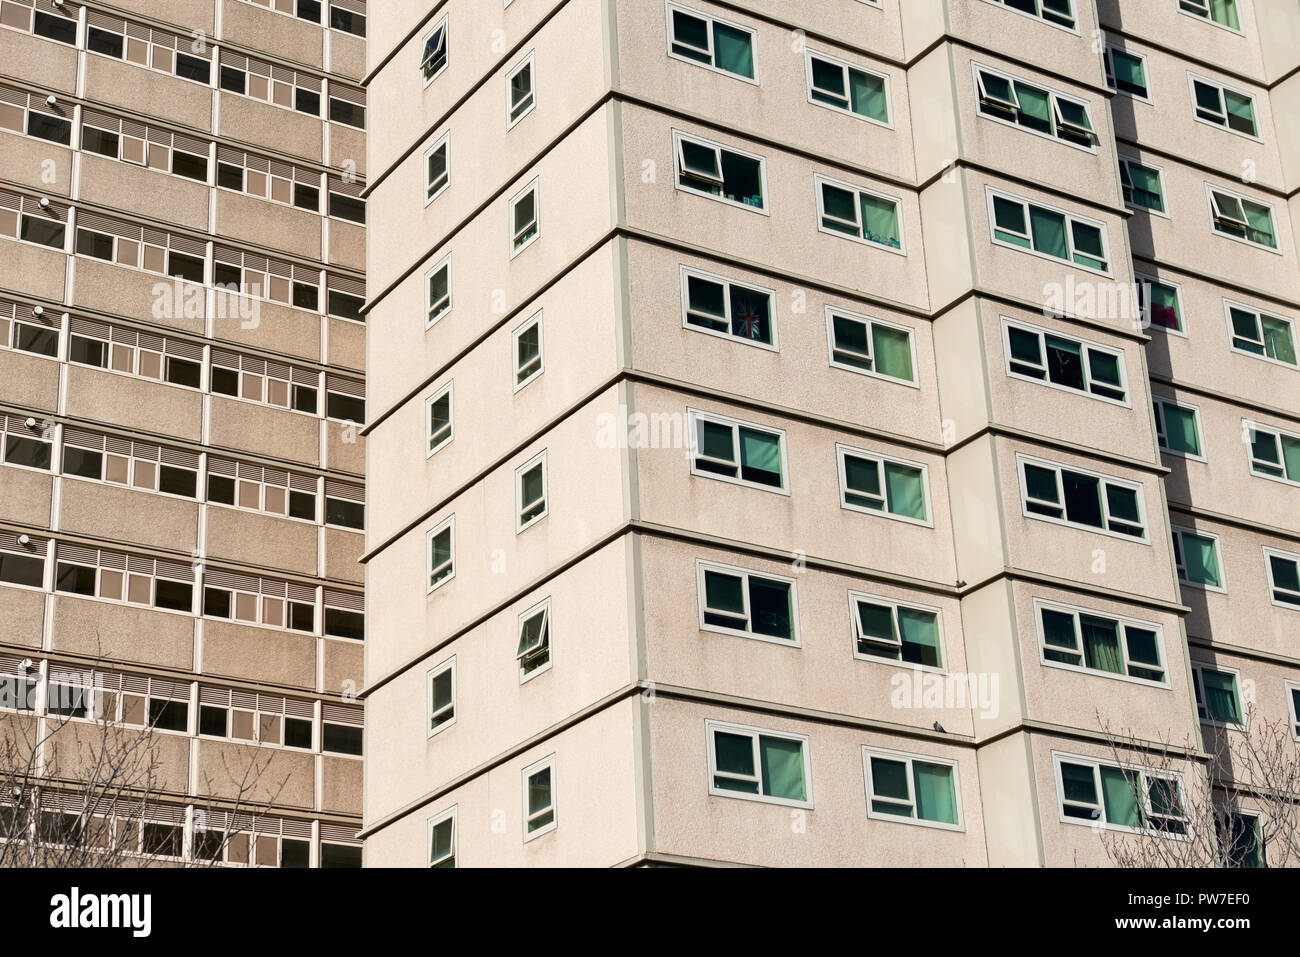 Government low cost and welfare accommodation apartment blocks close up. Stock Photo